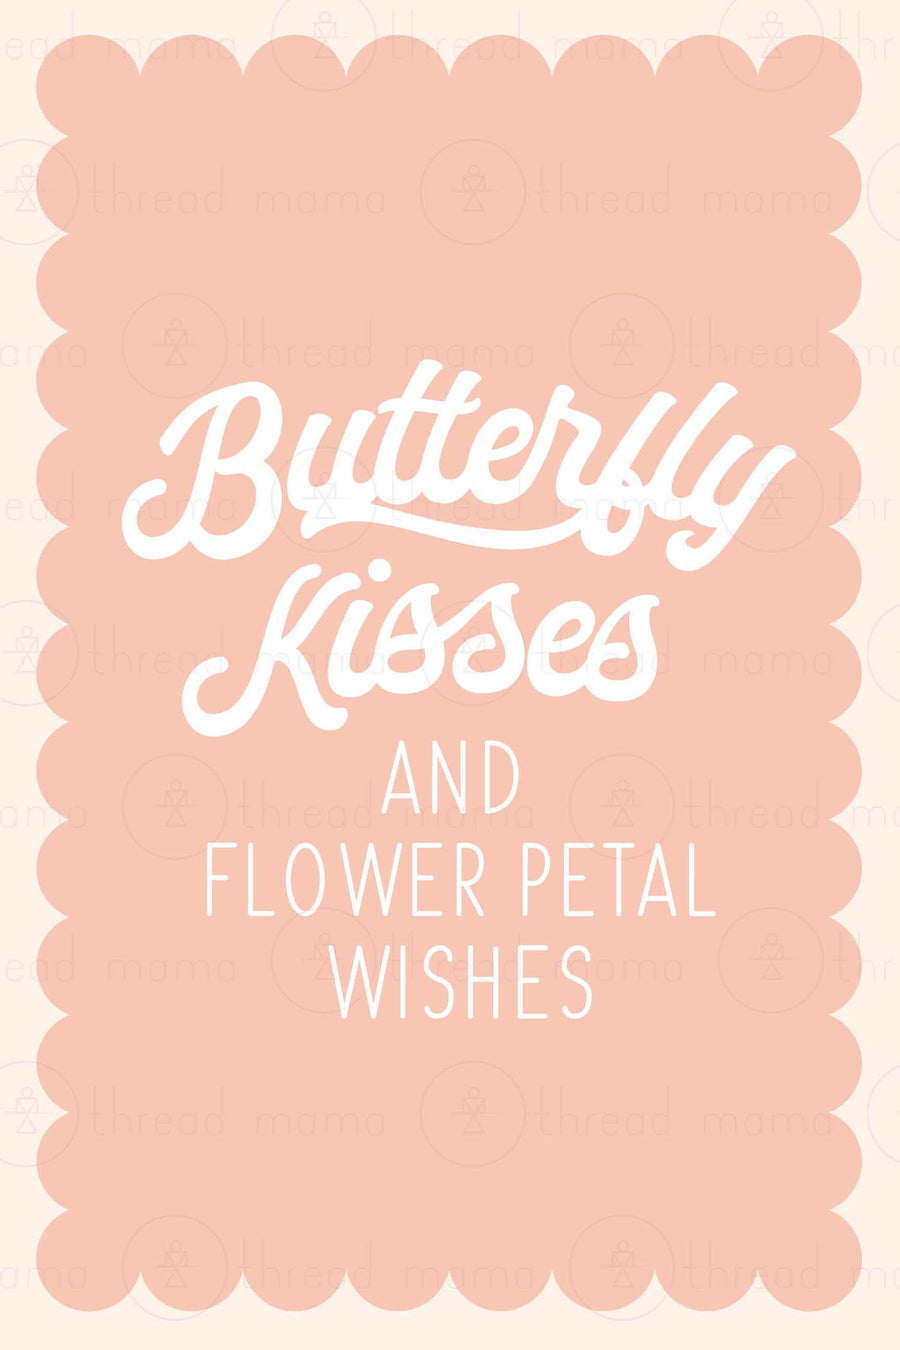 Butterfly Kisses (Printable Poster)